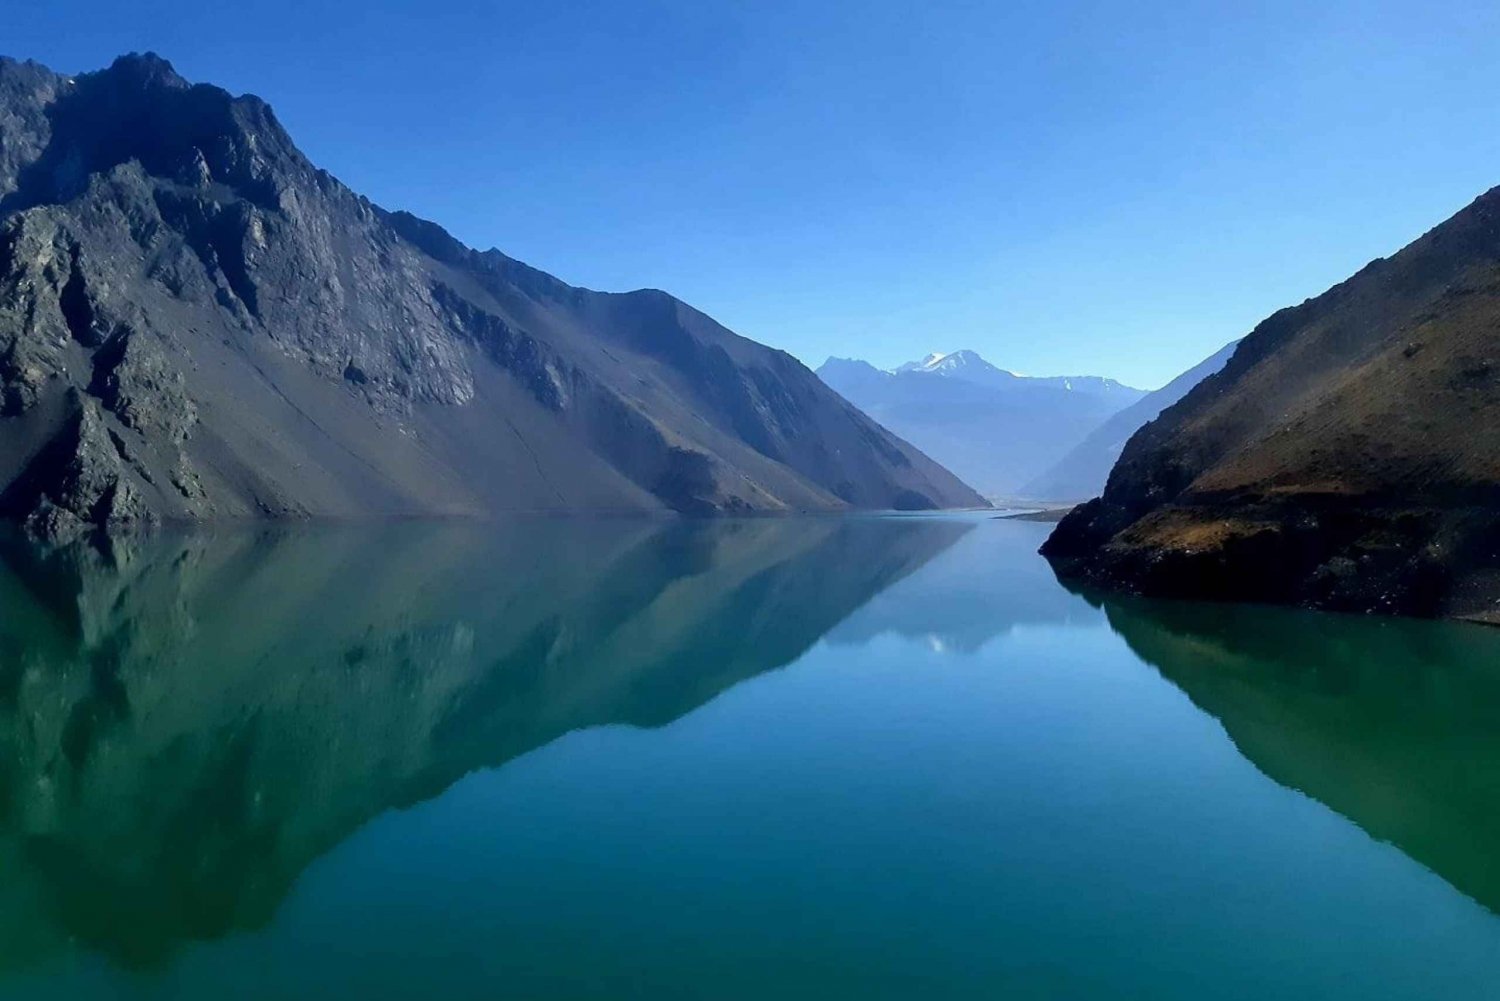 Embalse el Yeso: Full-day tour with picnic.